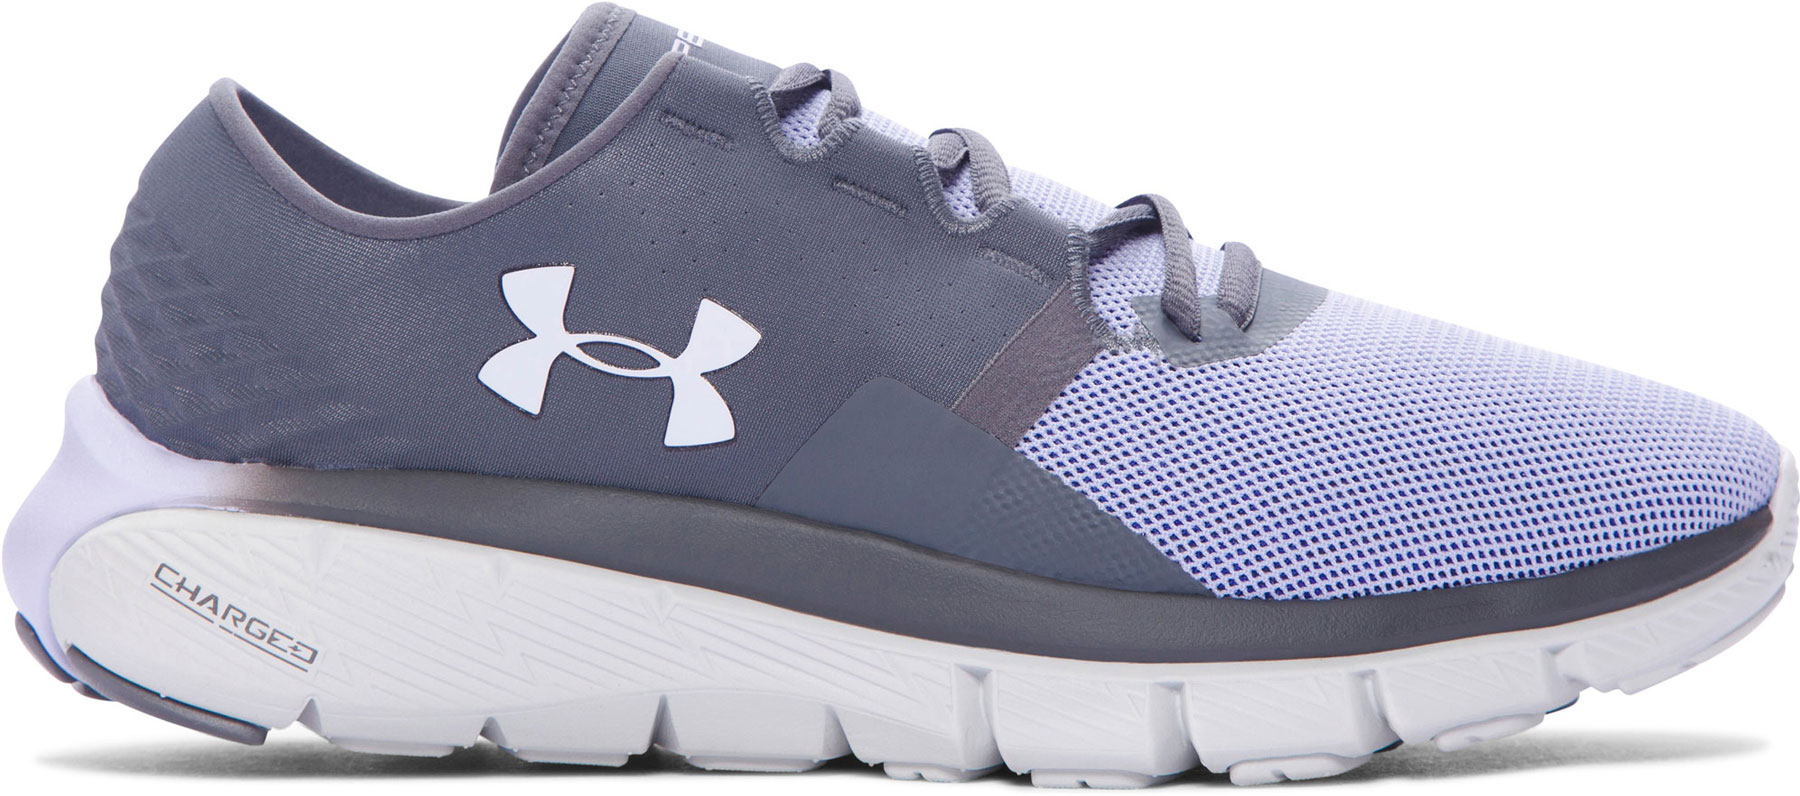 Under Armour FORTIS 2.1 W